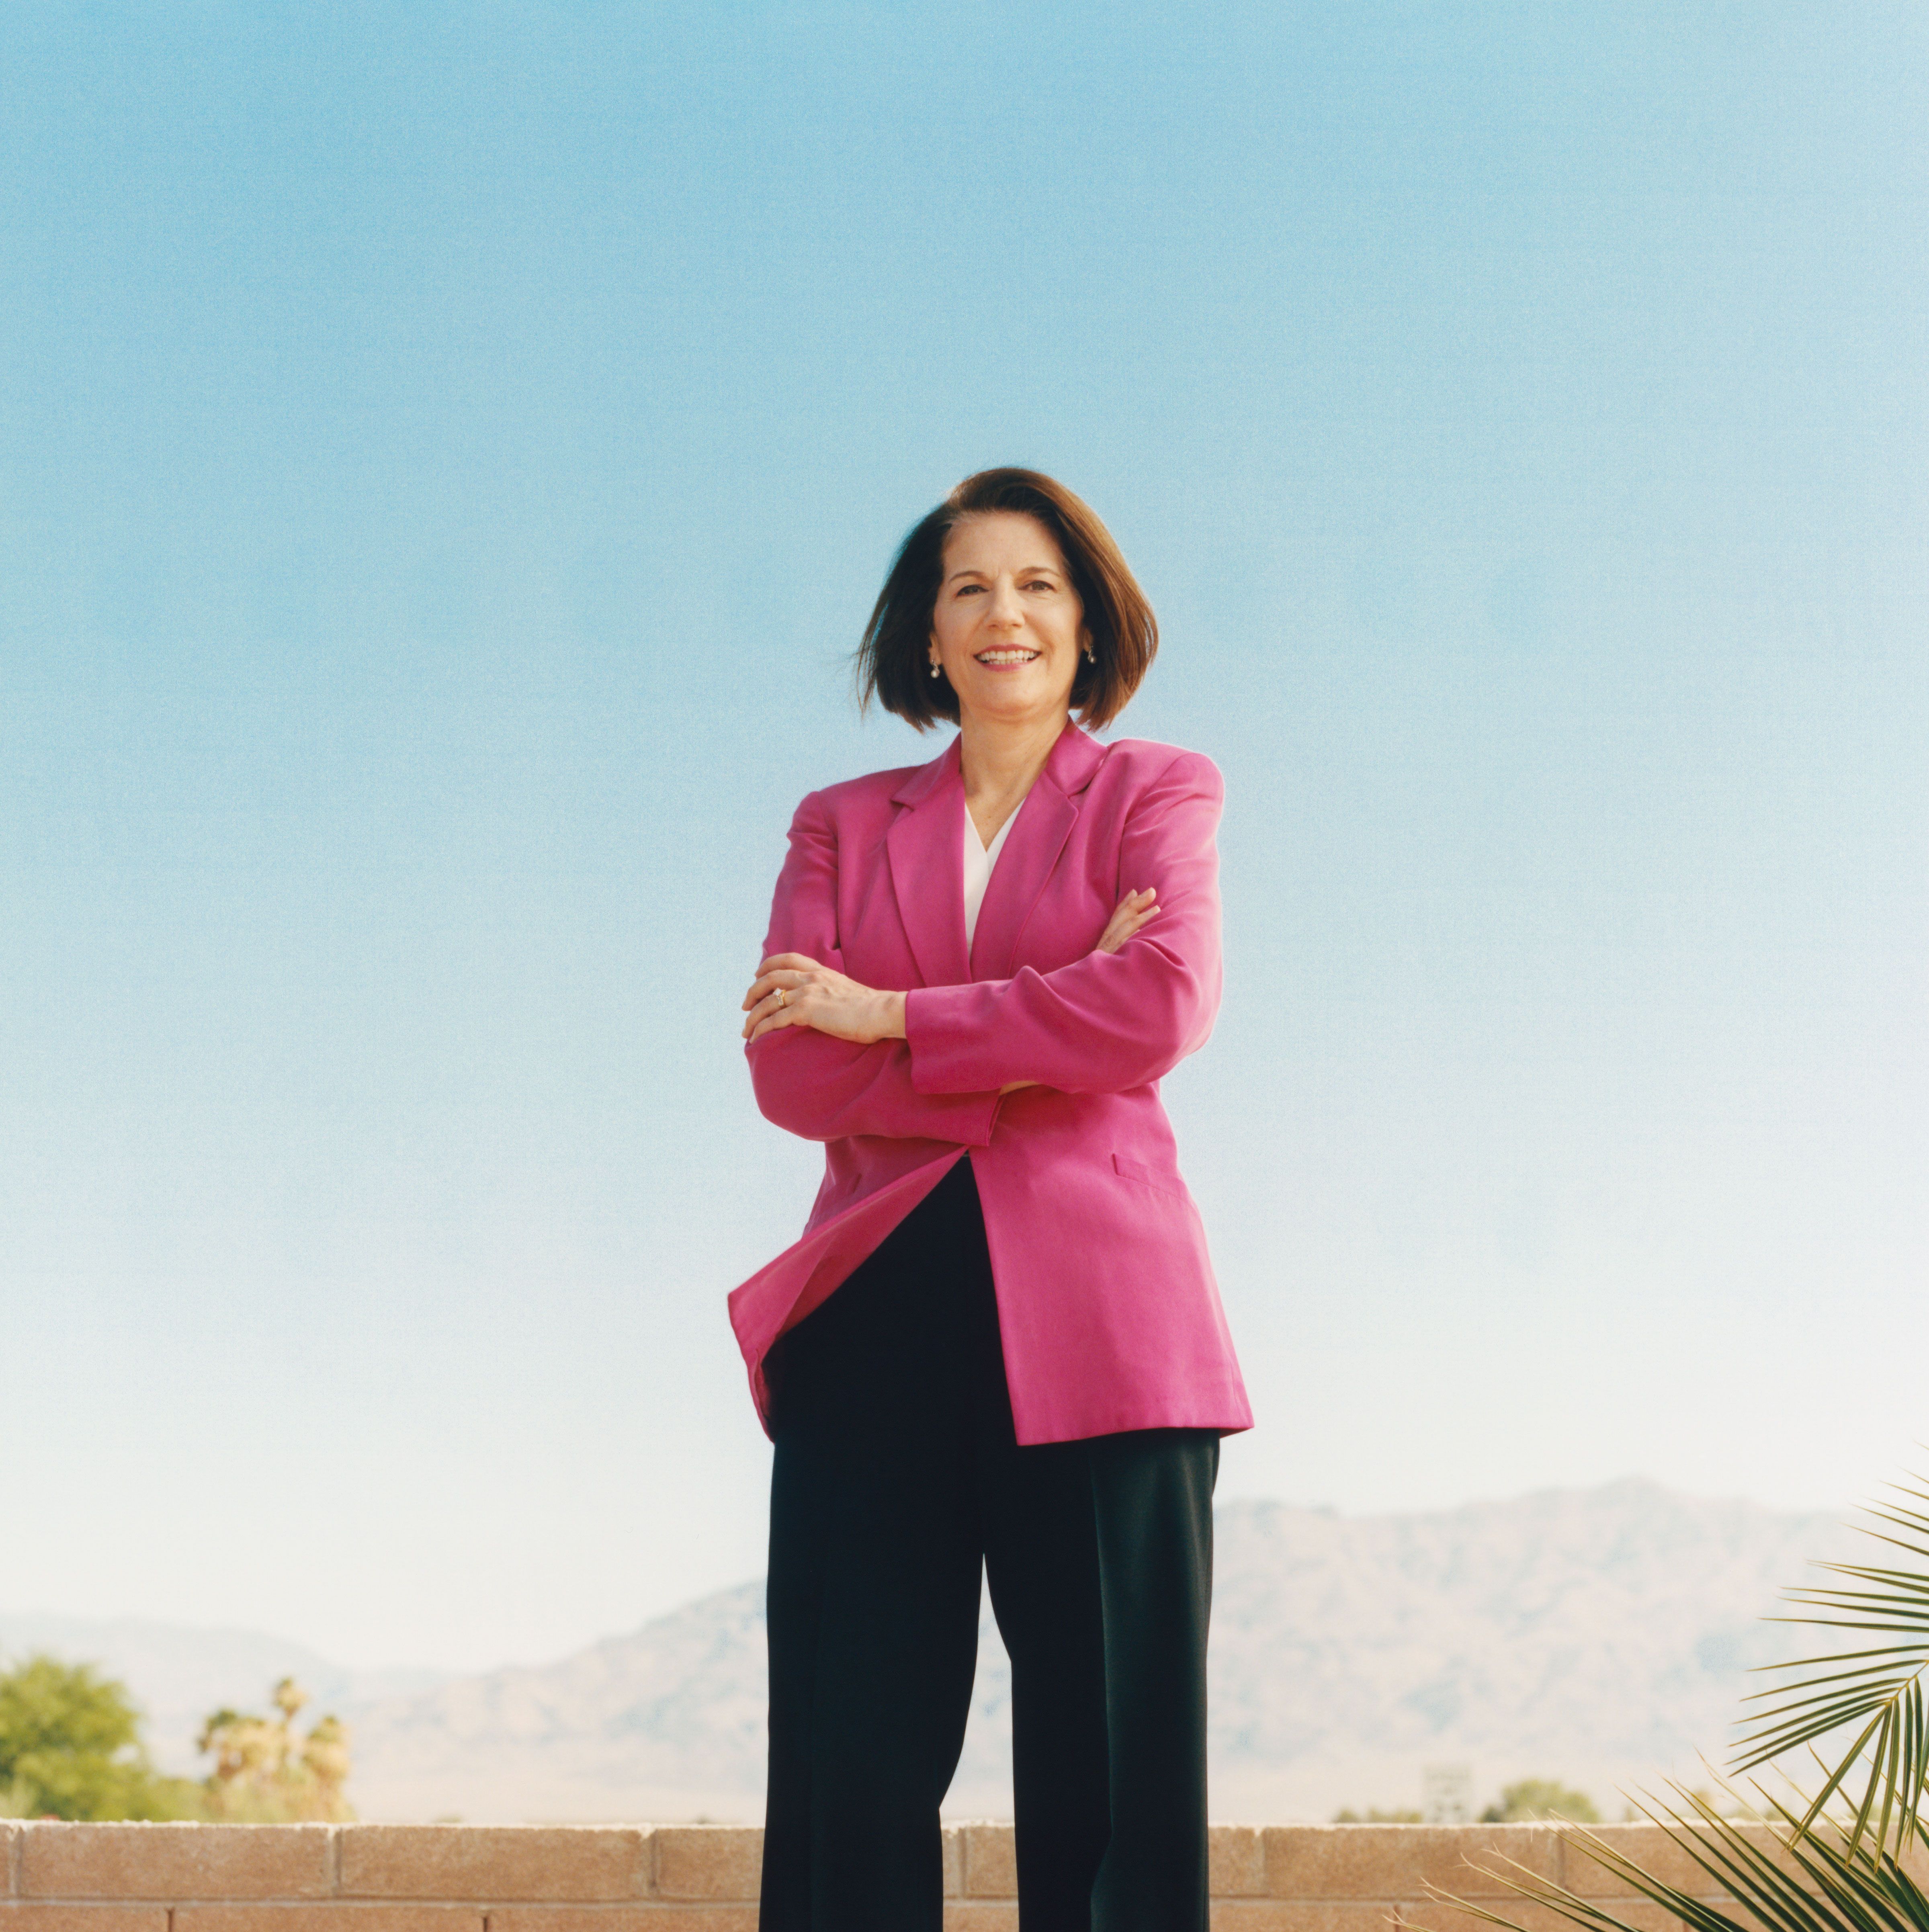 Catherine Cortez Masto, the only Latina in the U.S. Senate, is fighting to keep her seat in one of the most-watched races of the midterms.